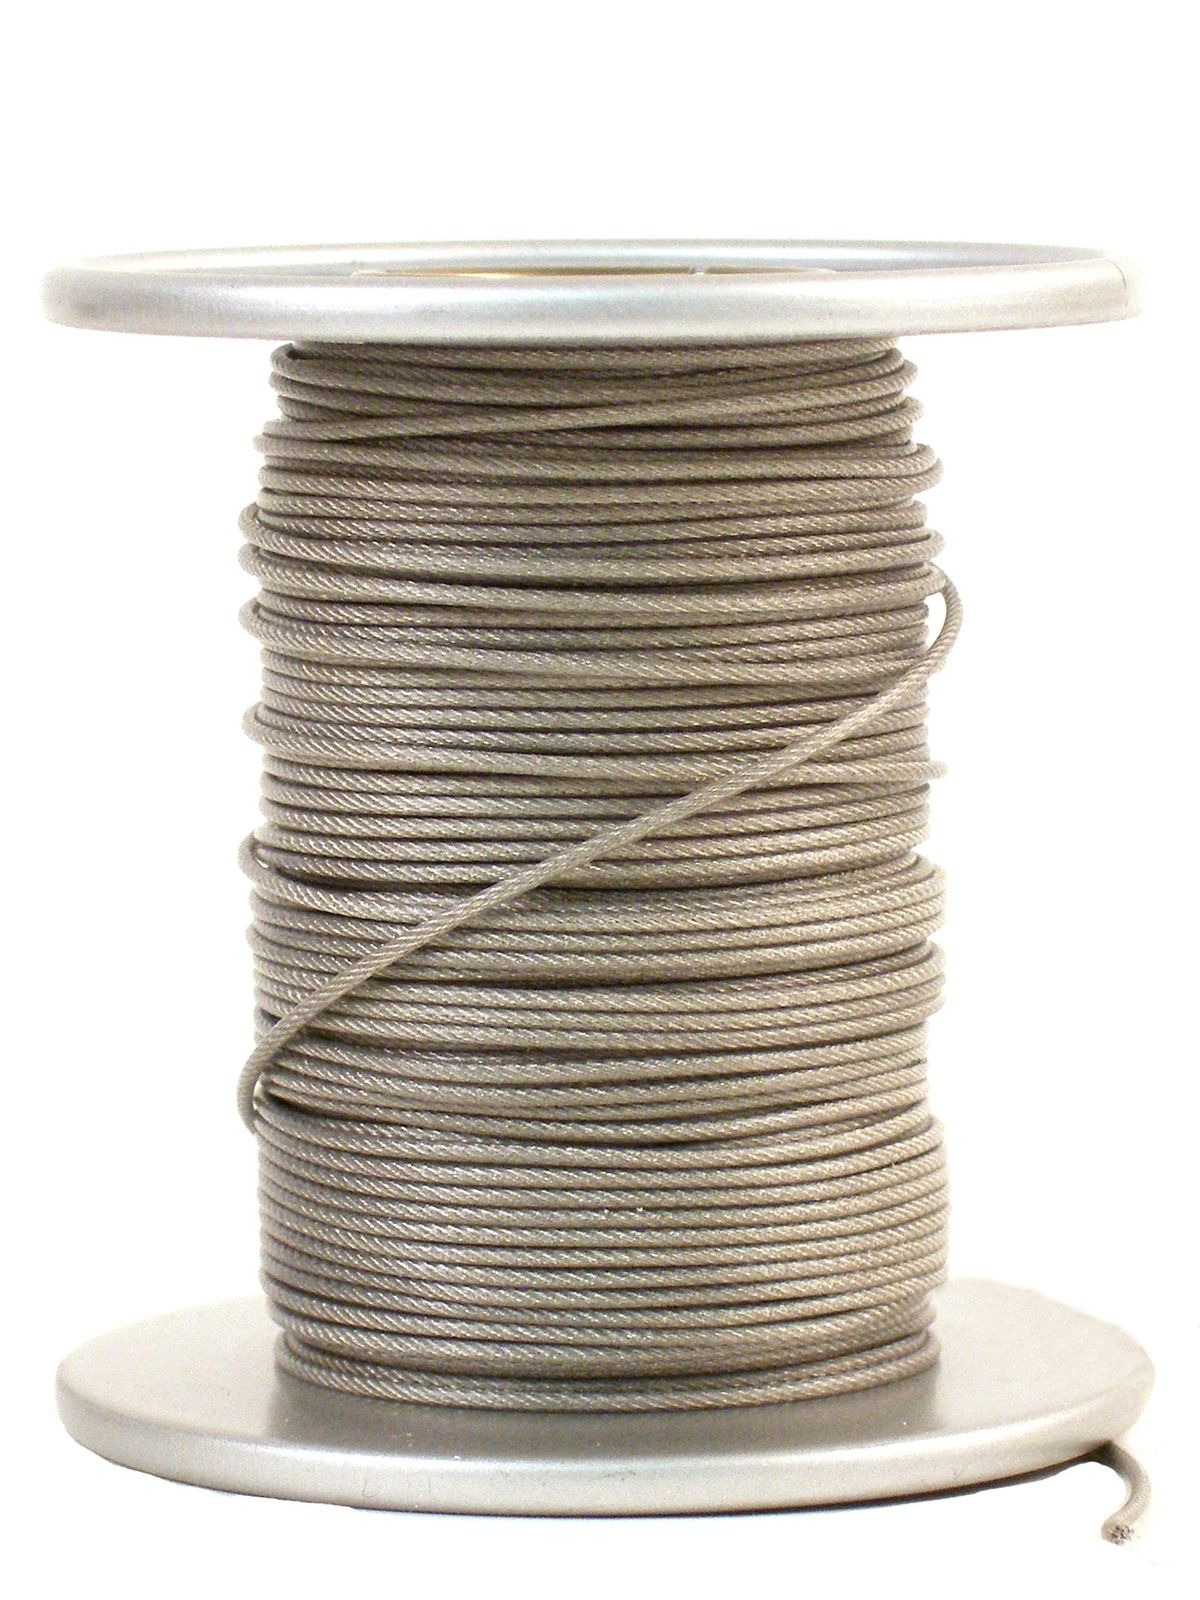 Stainless Steel Cable With Nylon Coating Stainless Cable